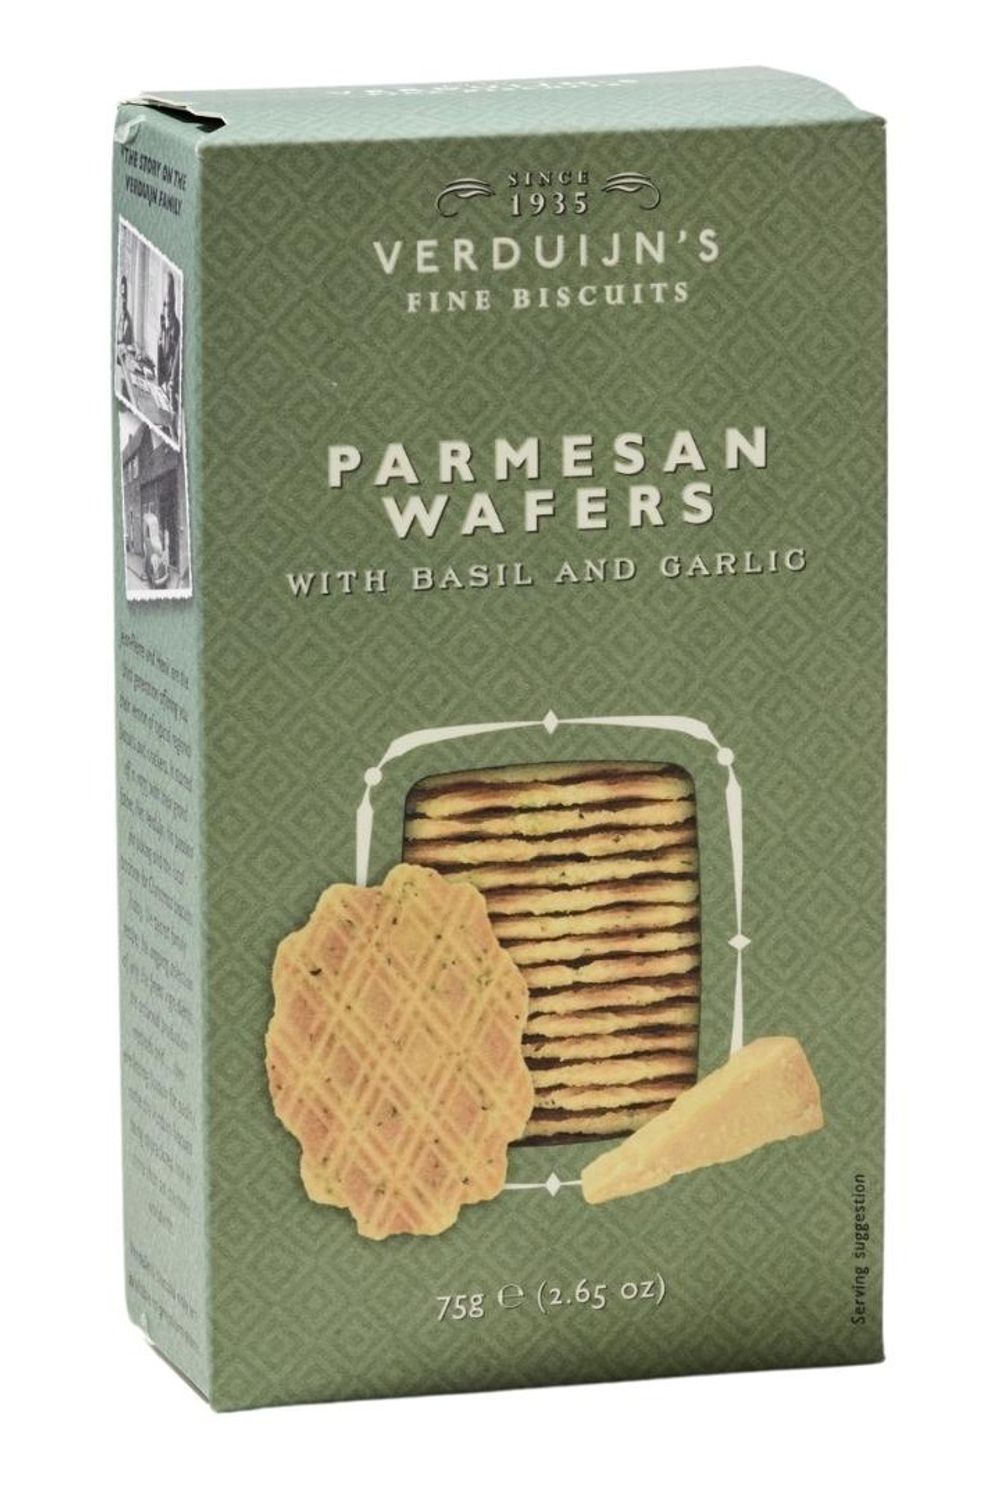 Parmesan Wafers with Basil and Garlic